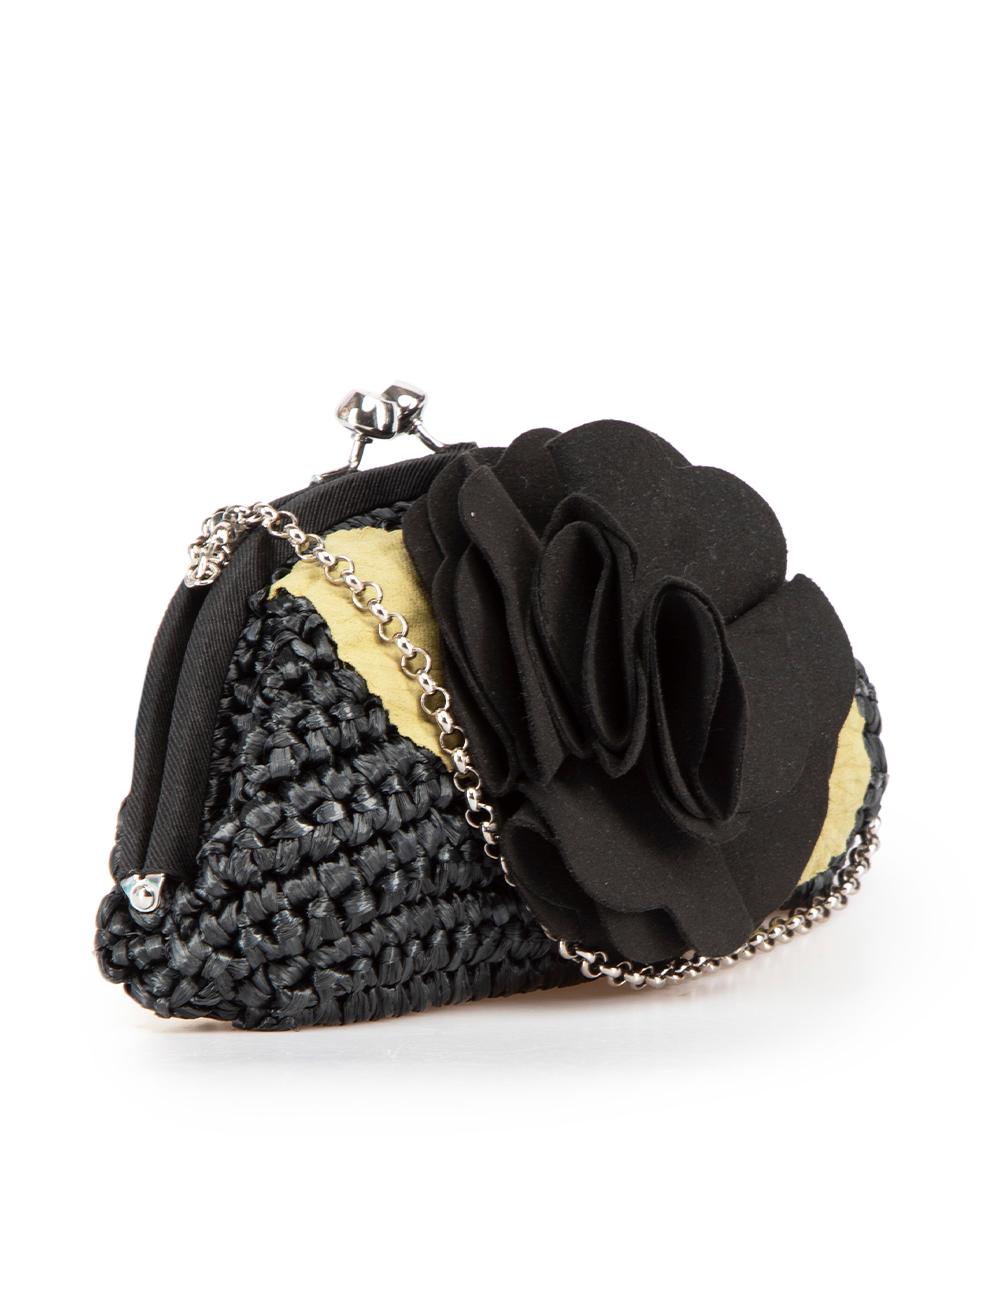 CONDITION is Good. Minor wear to clutch is evident. Light discolouration to lining and rose 3D embellishment has been flattened slightly due to storage on this used Lulu Guinness designer resale item.
 
Details
Black
Raffia
Mini clutch bag
Clasp